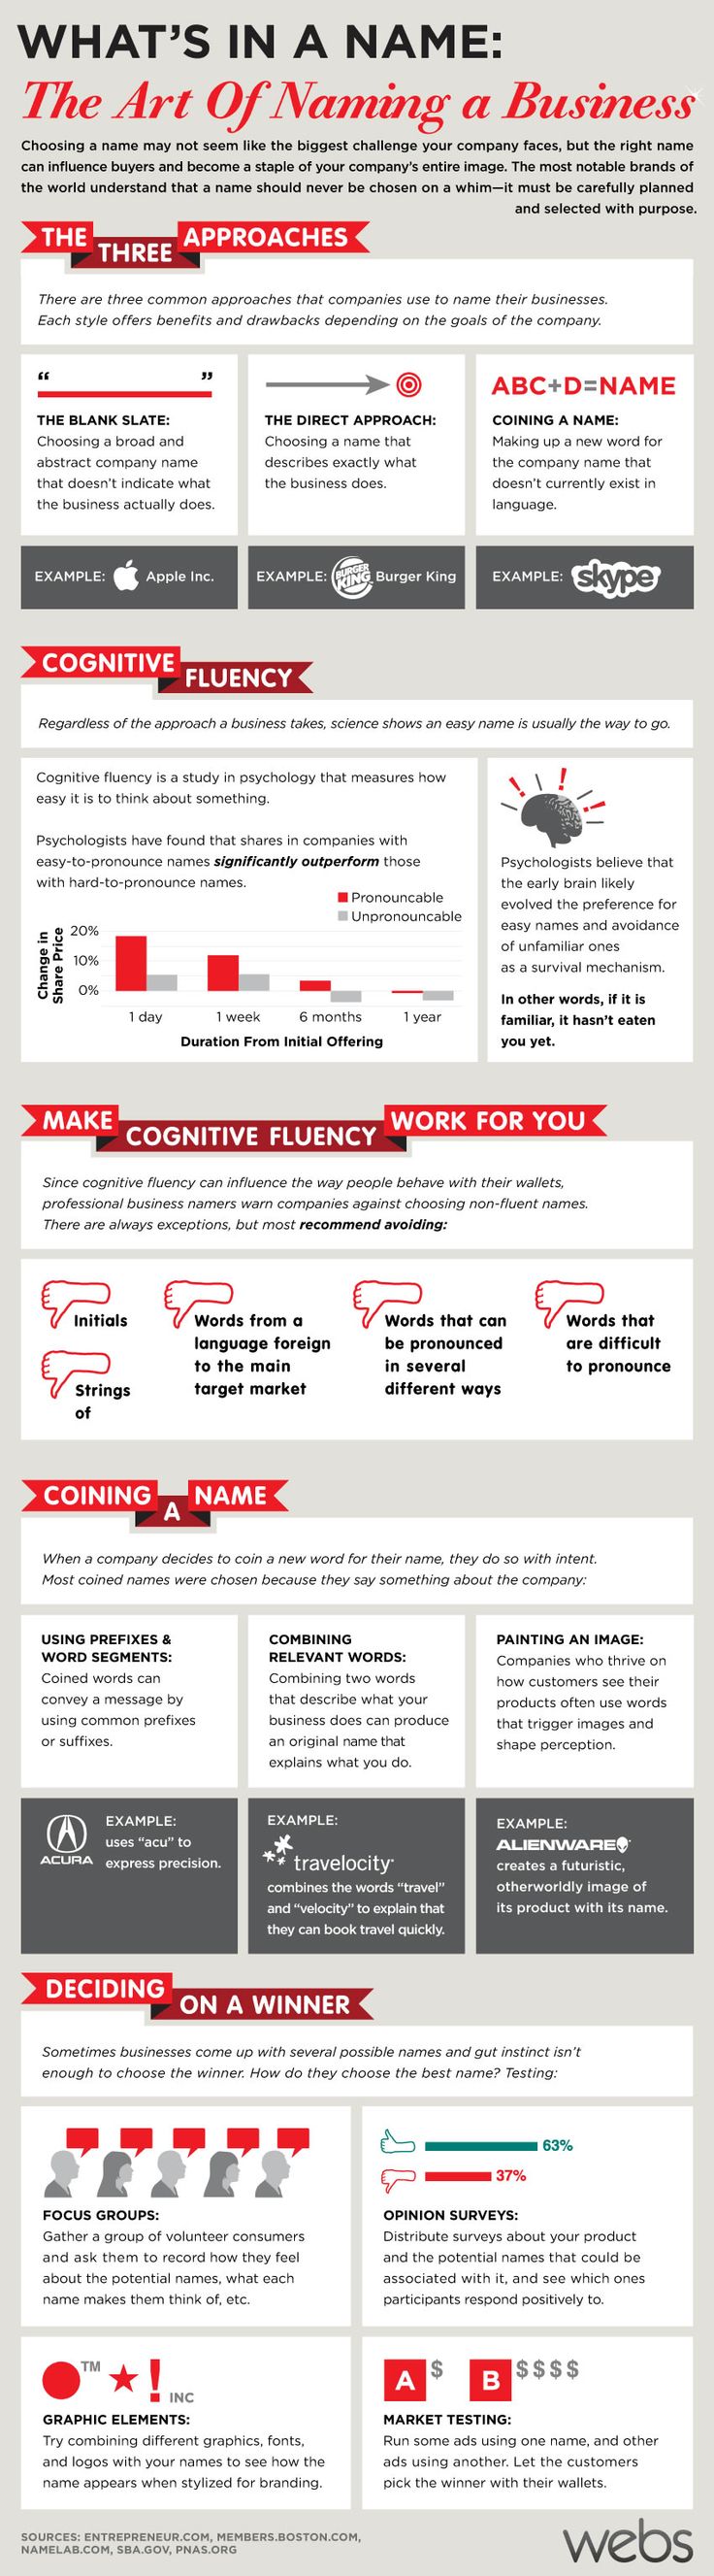 Naming A Business Infographic